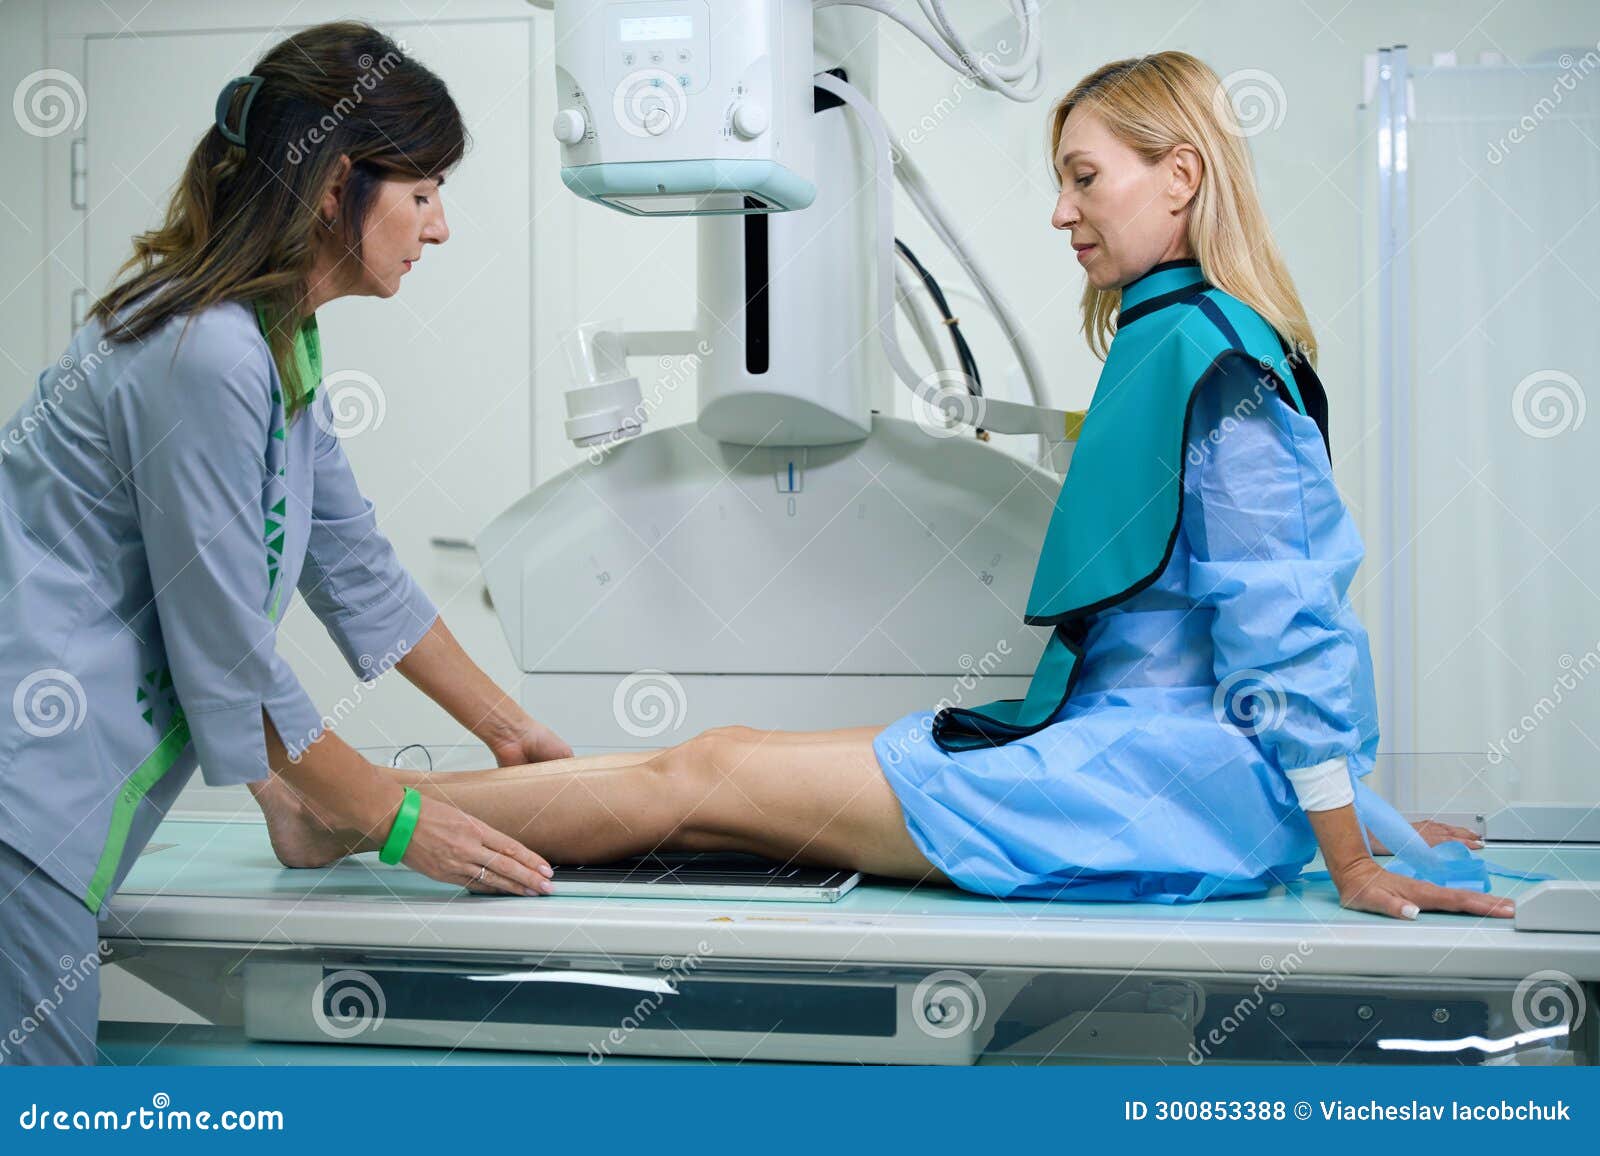 qualified radiographic technologist preparing woman for x-ray of knee joints